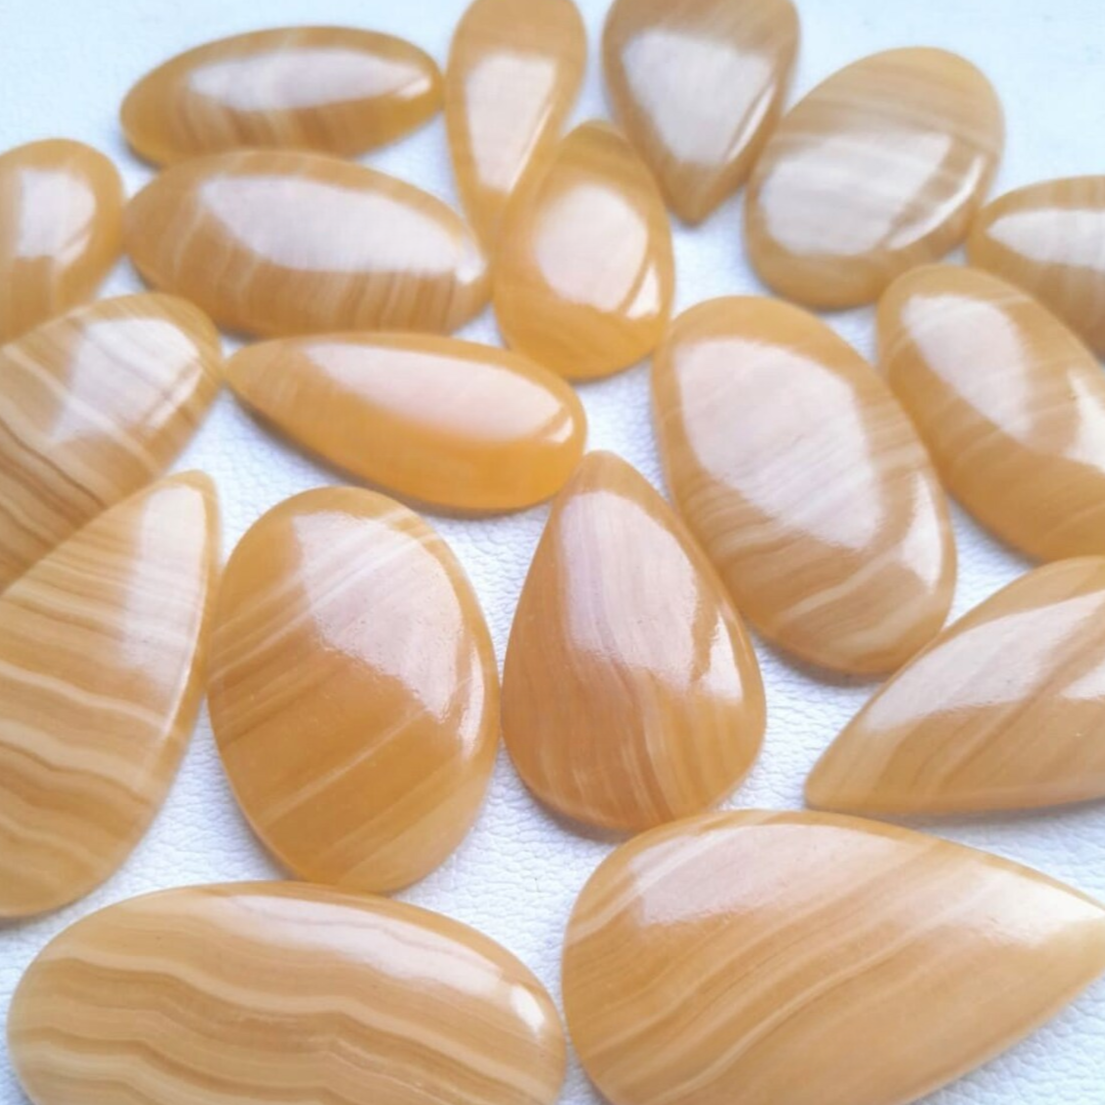 Wholesale Lot of Yellow Aragonite Cabochon By Weight With Different Shapes And Sizes Used For Jewelry Making (Natural)